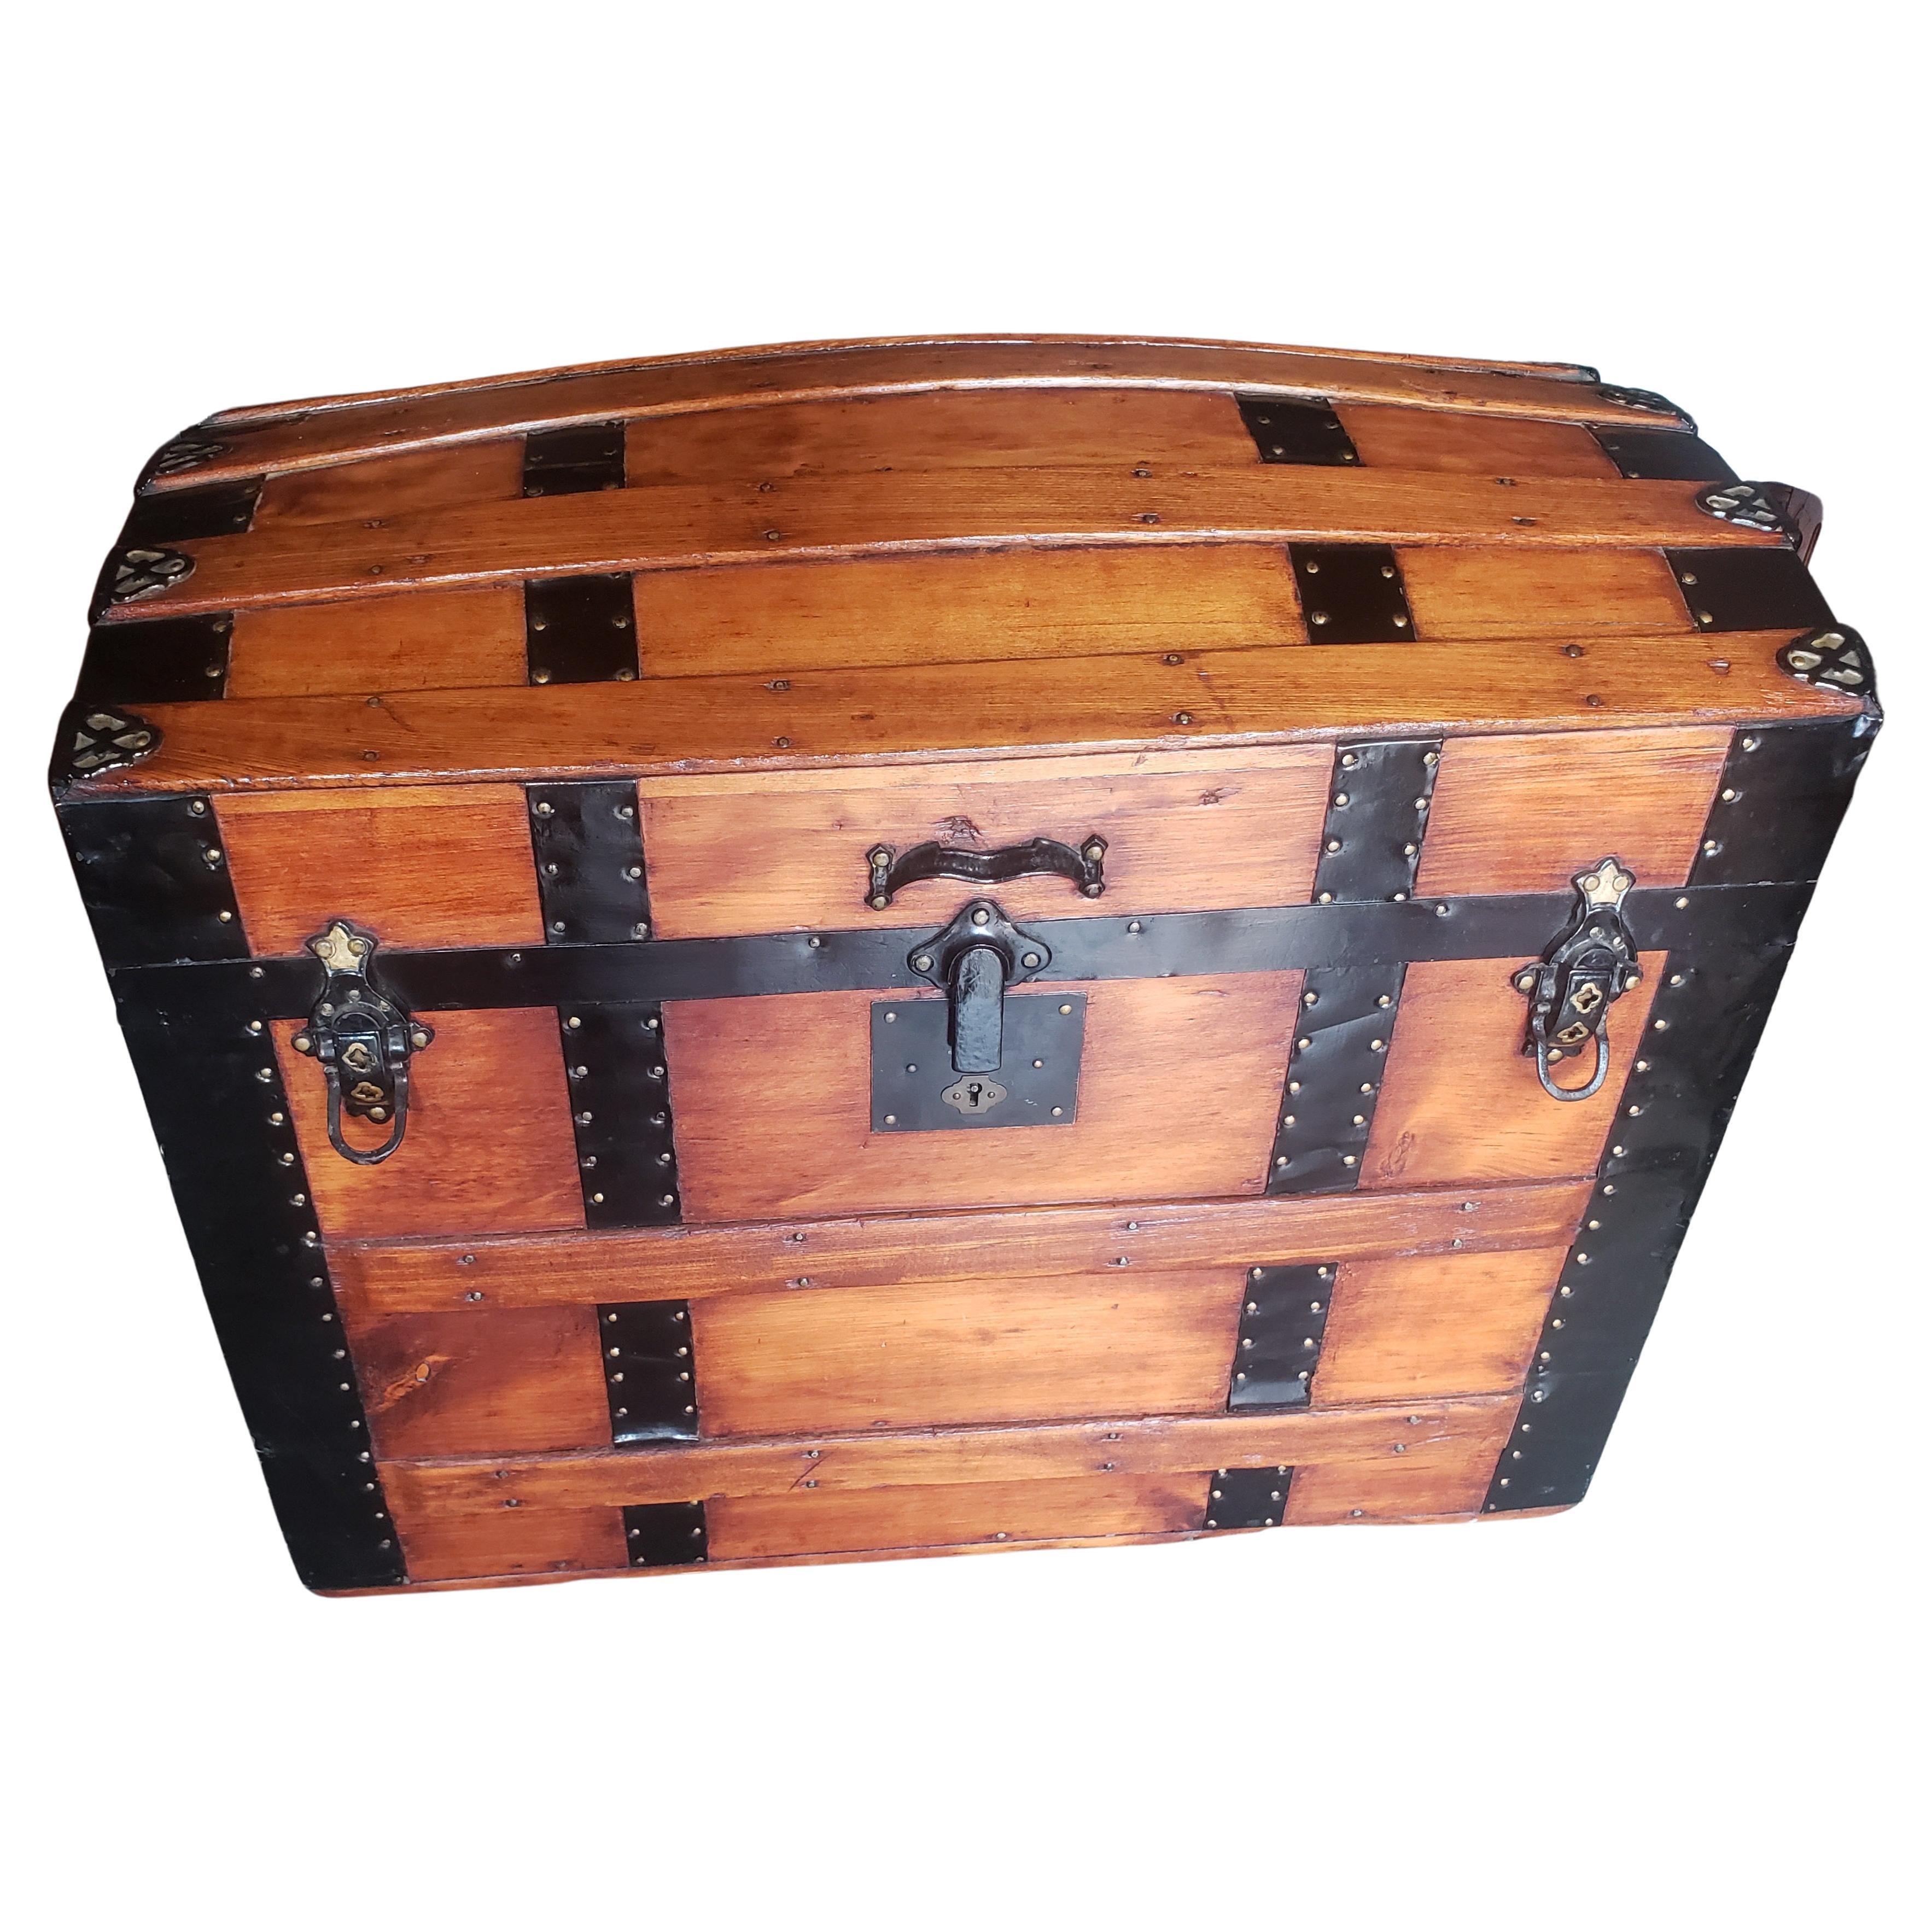 A gorgeous, completely Refinished Early American Steamers Dome Top Pine and iron Trunk / Blanket Chest Trunk on wheels and lined with American Colonial scenes textile. Great for Blanket andnother belongings storage.